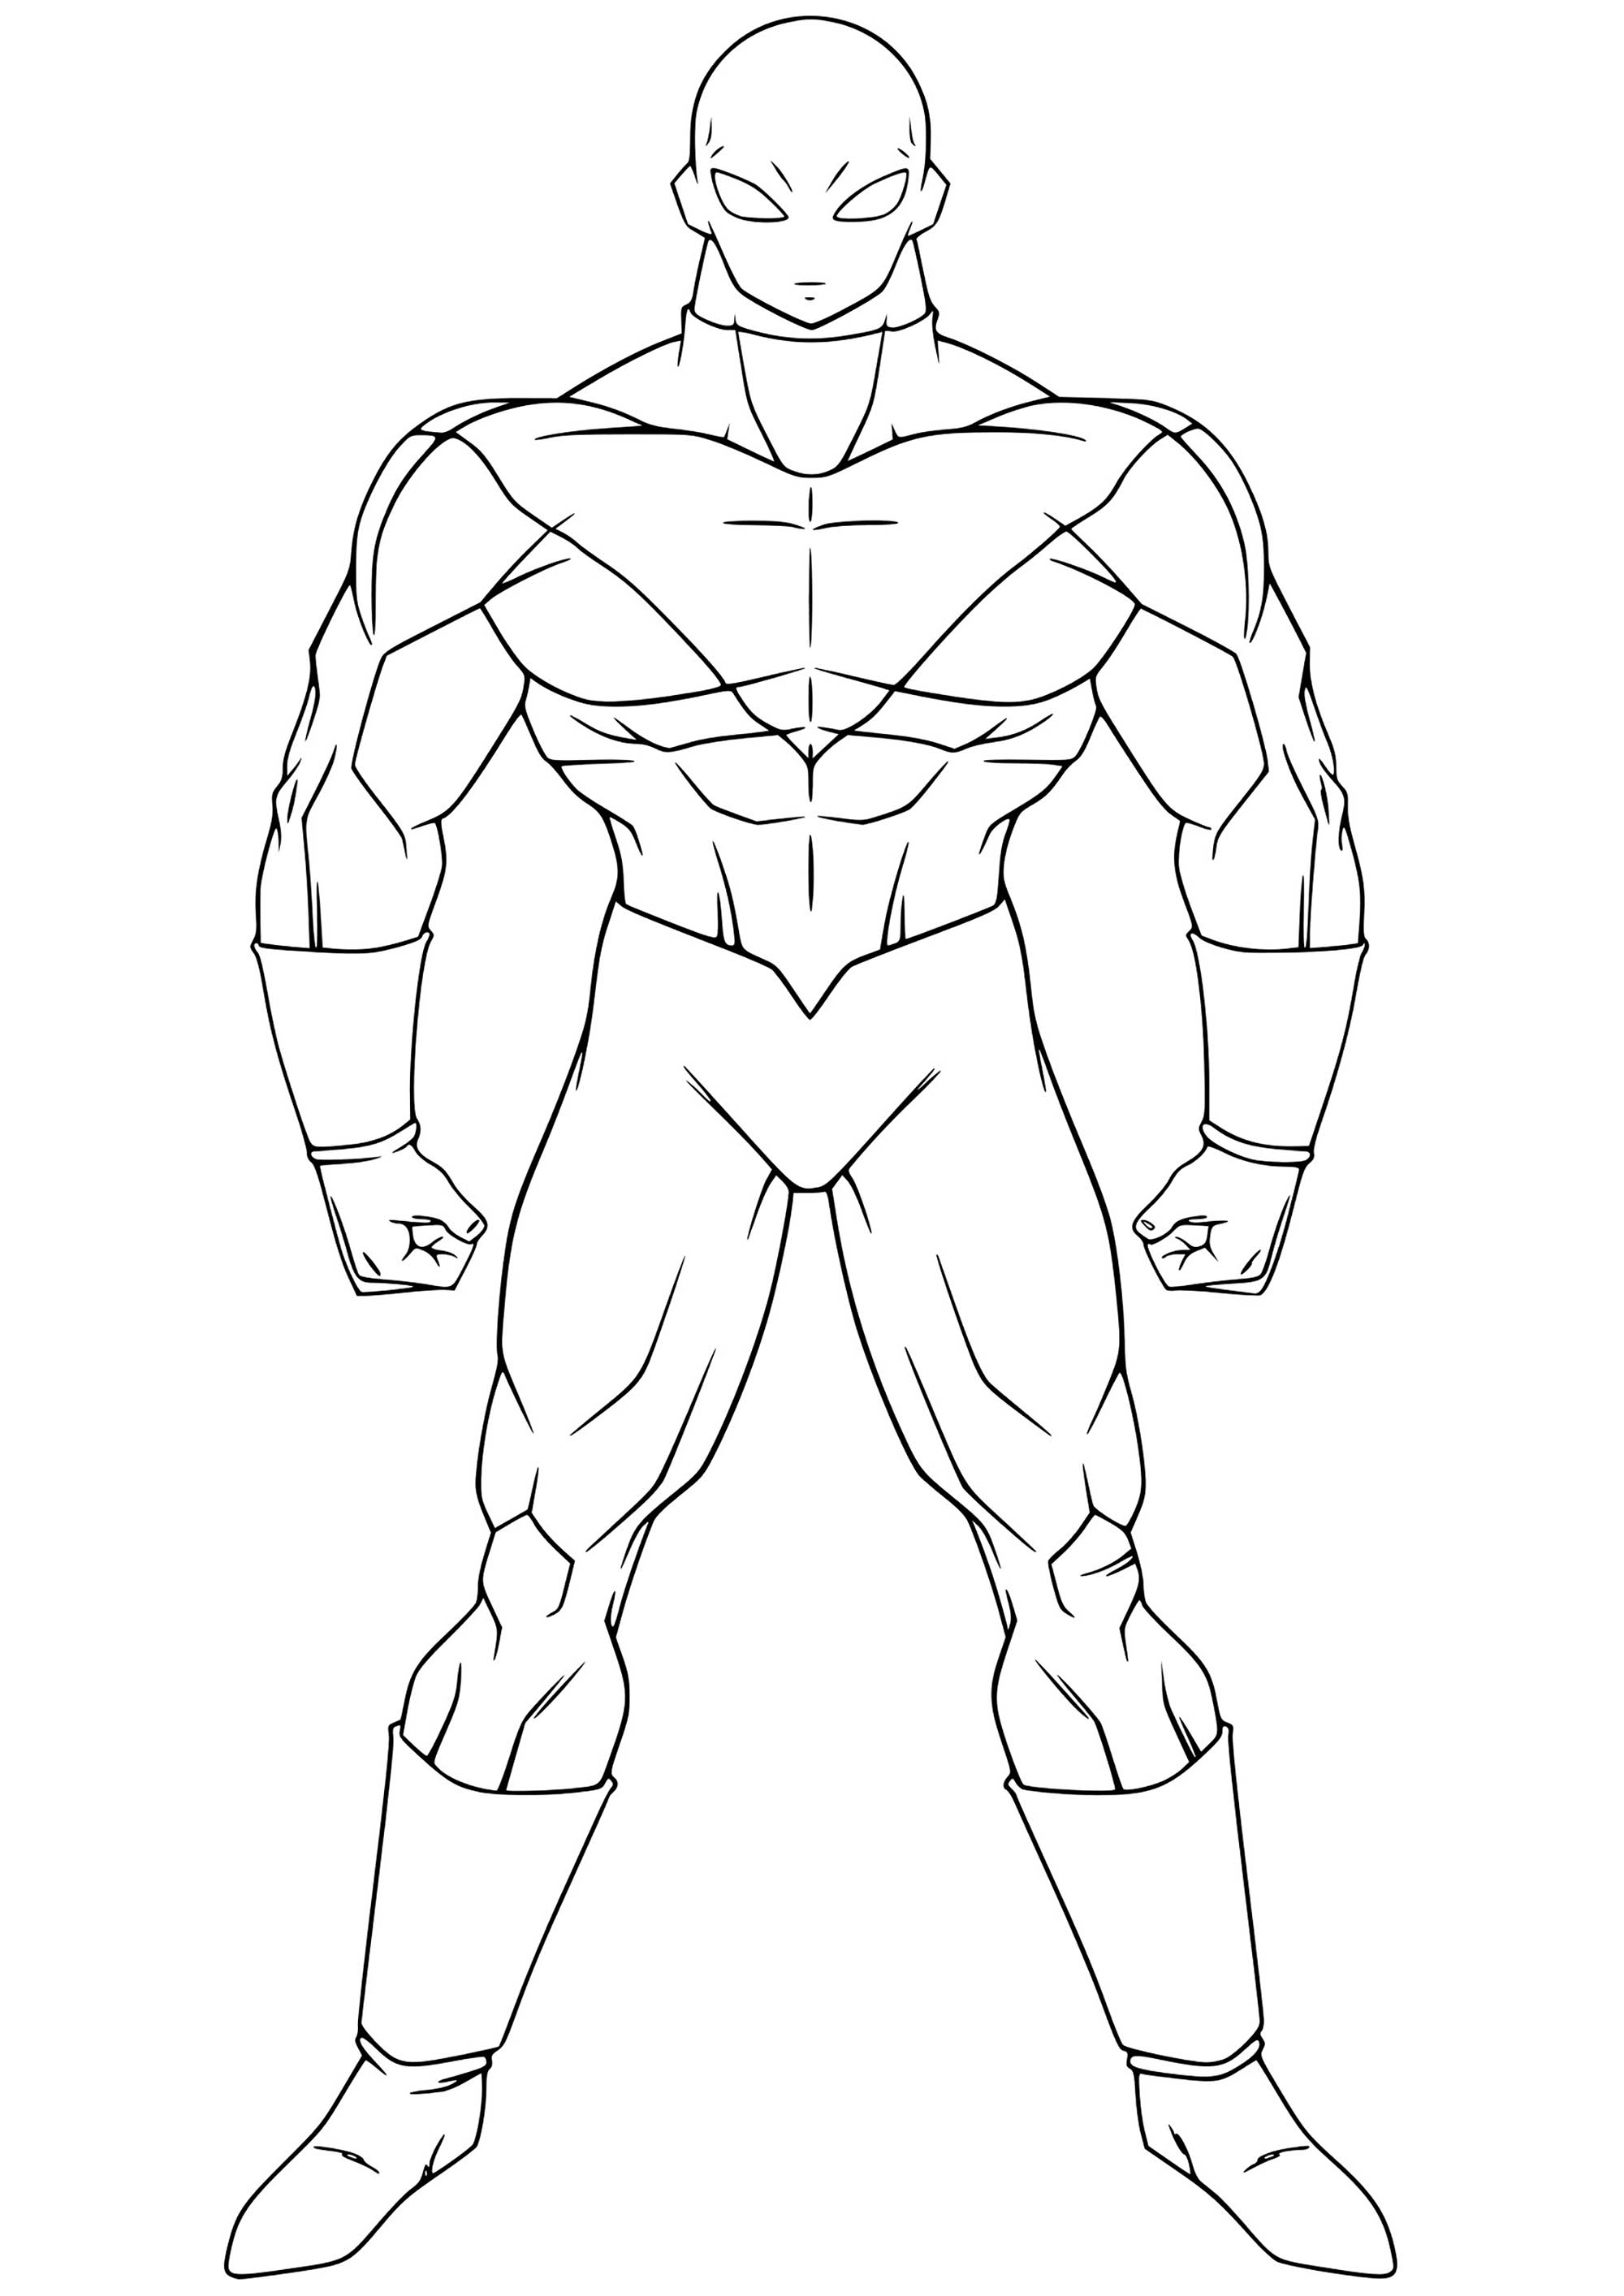 Dragon Ball Super coloring page with few details for kids : Jiren